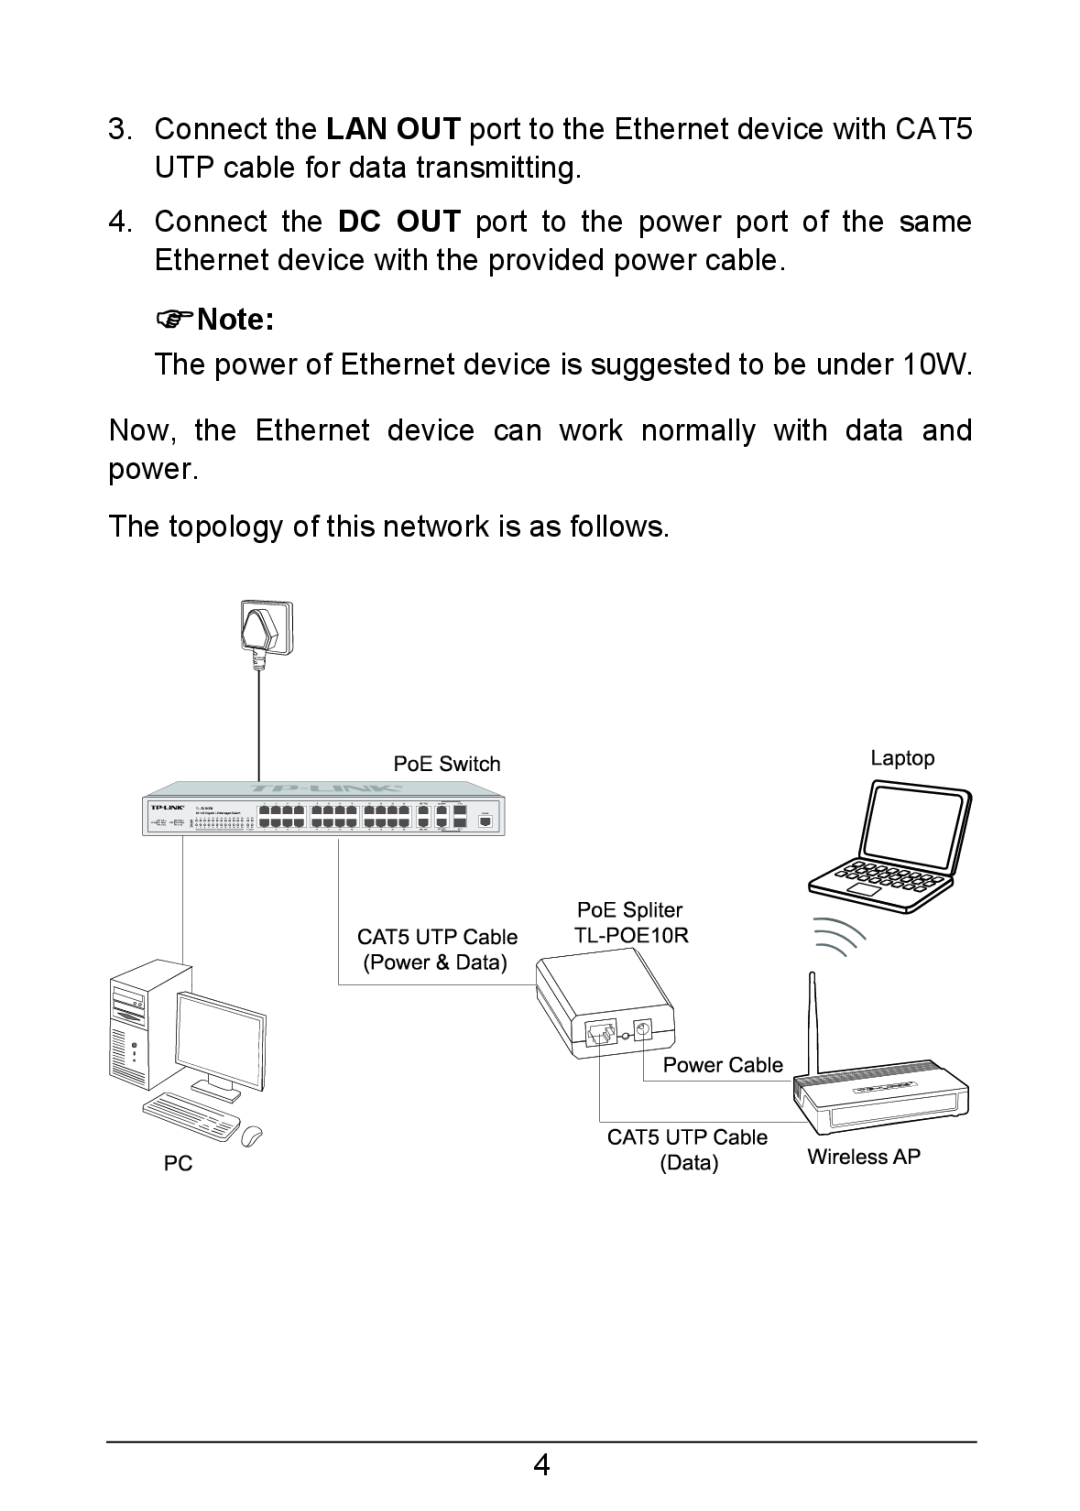 TP-Link TL-POE10R The power of Ethernet device is suggested to be under 10W, The topology of this network is as follows 